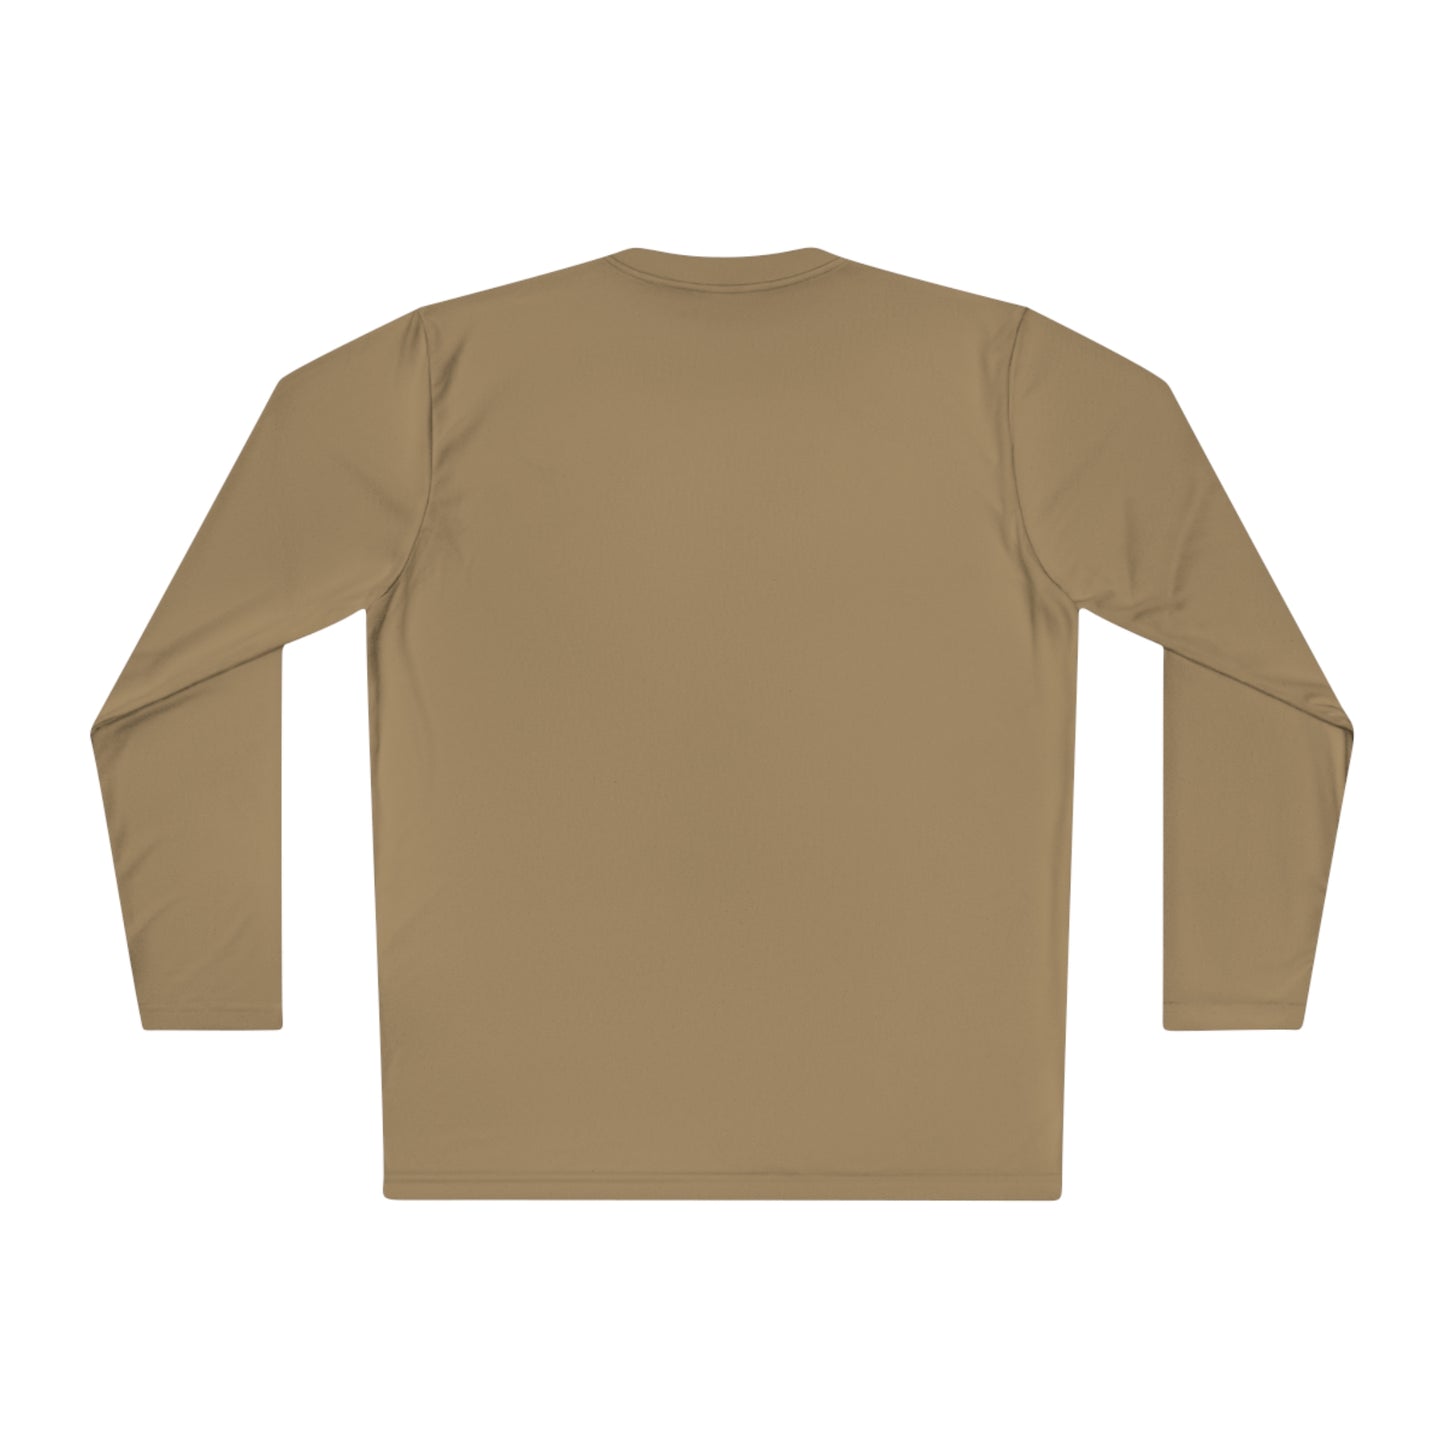 RollHouse ATHLETIC MATERIAL Lightweight Long Sleeve Tee